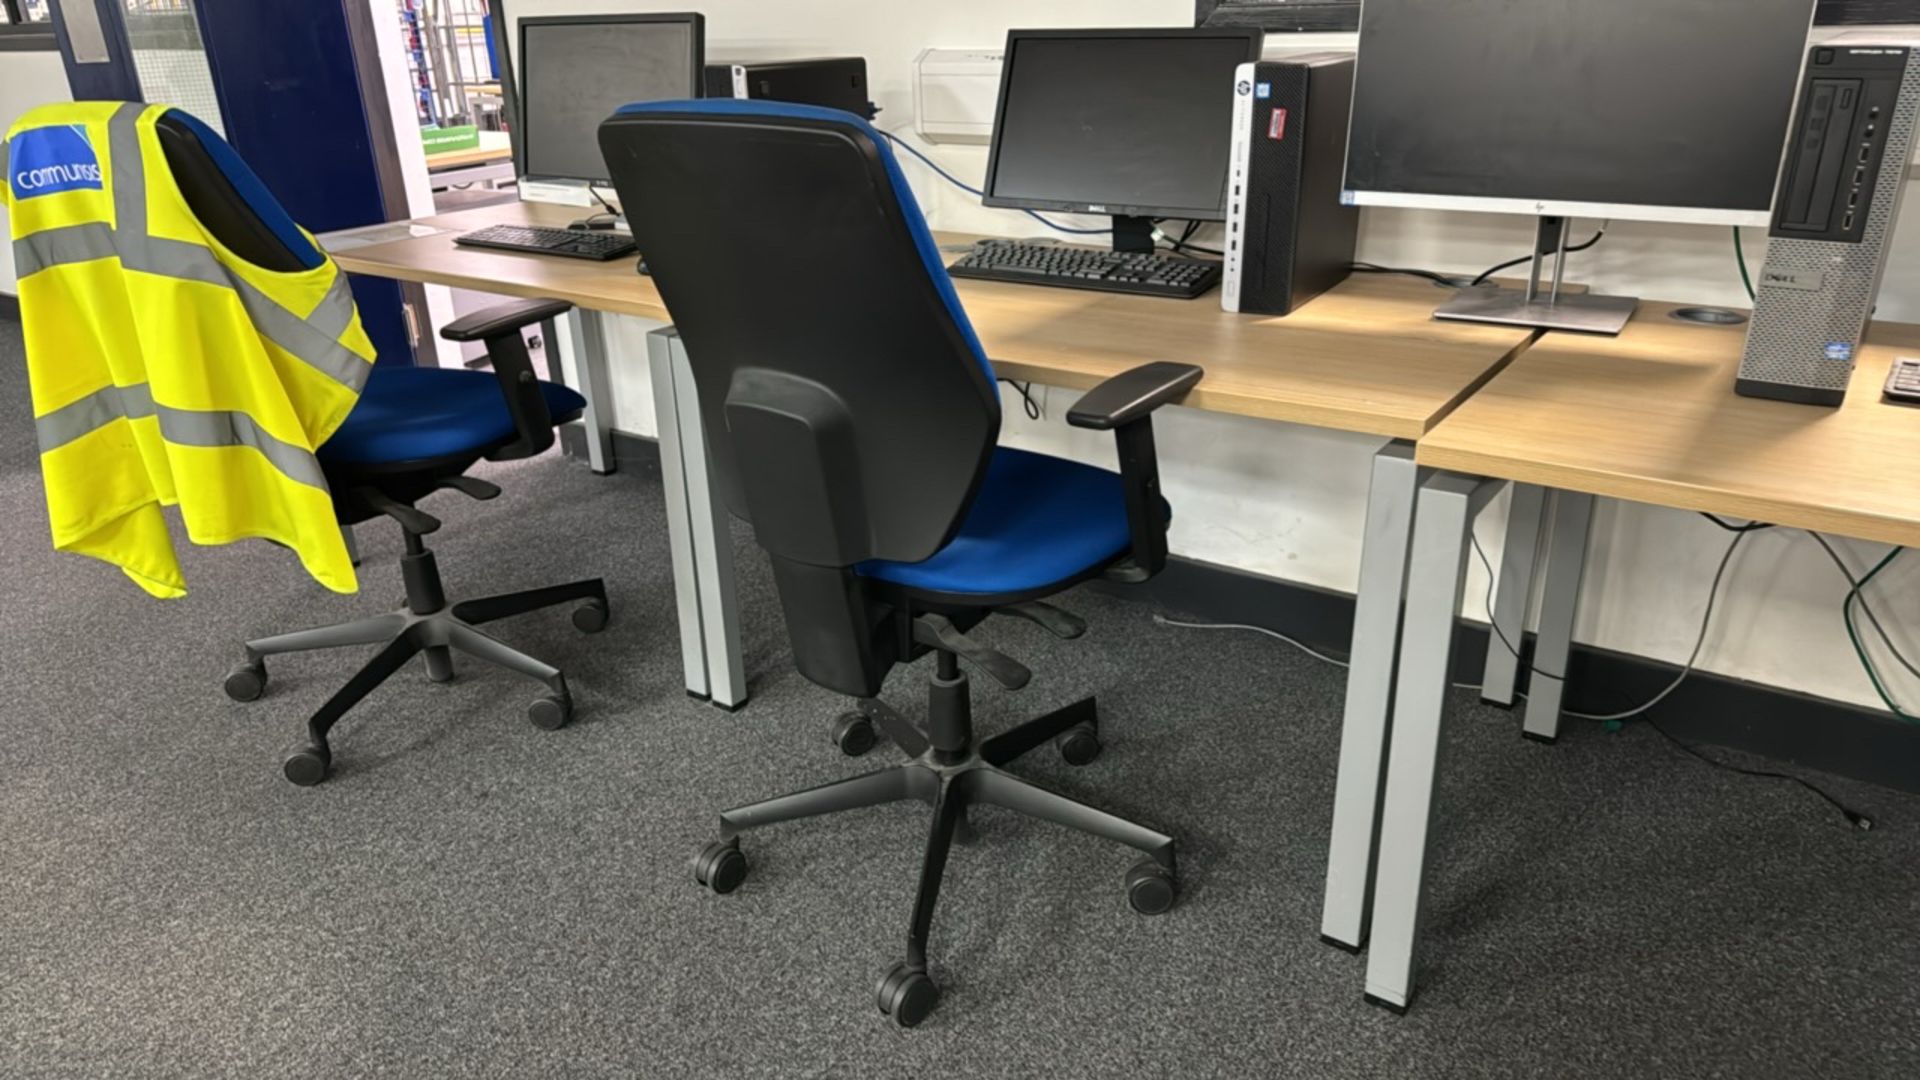 Bank Of 4 Desks & 4 Office Chairs - Image 6 of 6